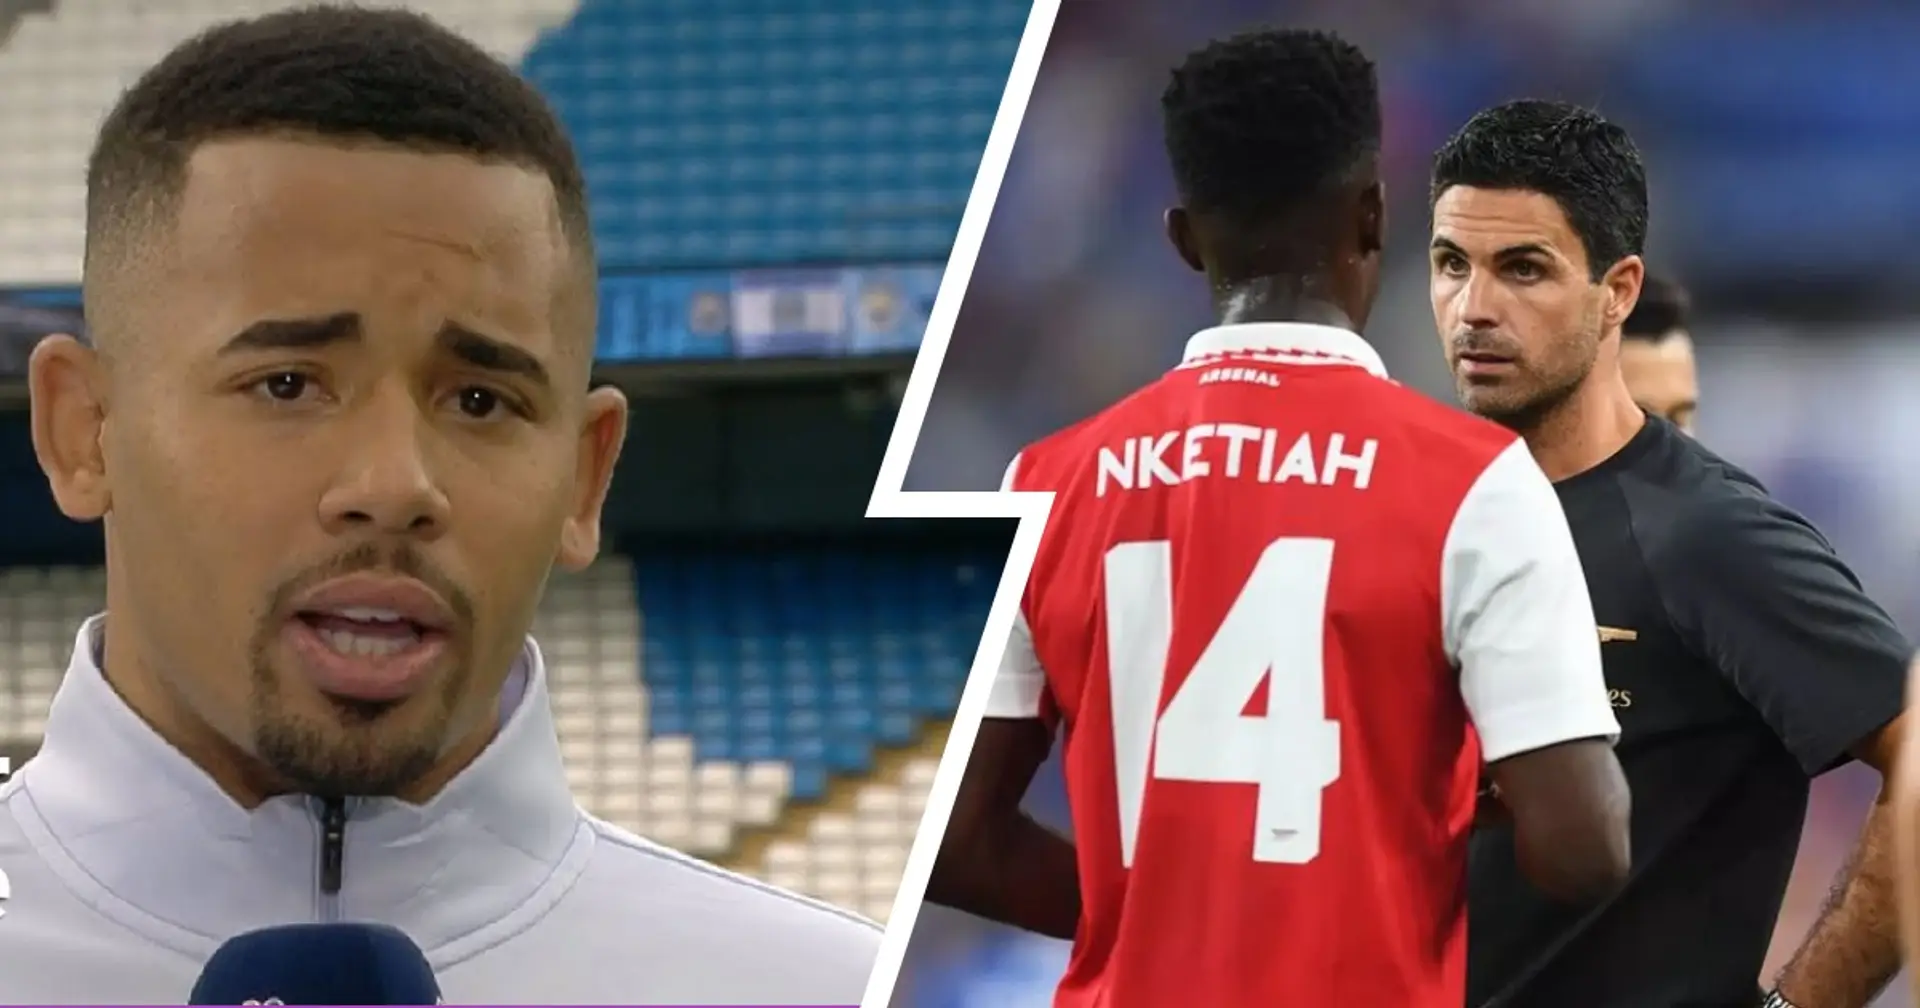 'I will never accept that': Eddie Nketiah fires warning to Mikel Arteta 